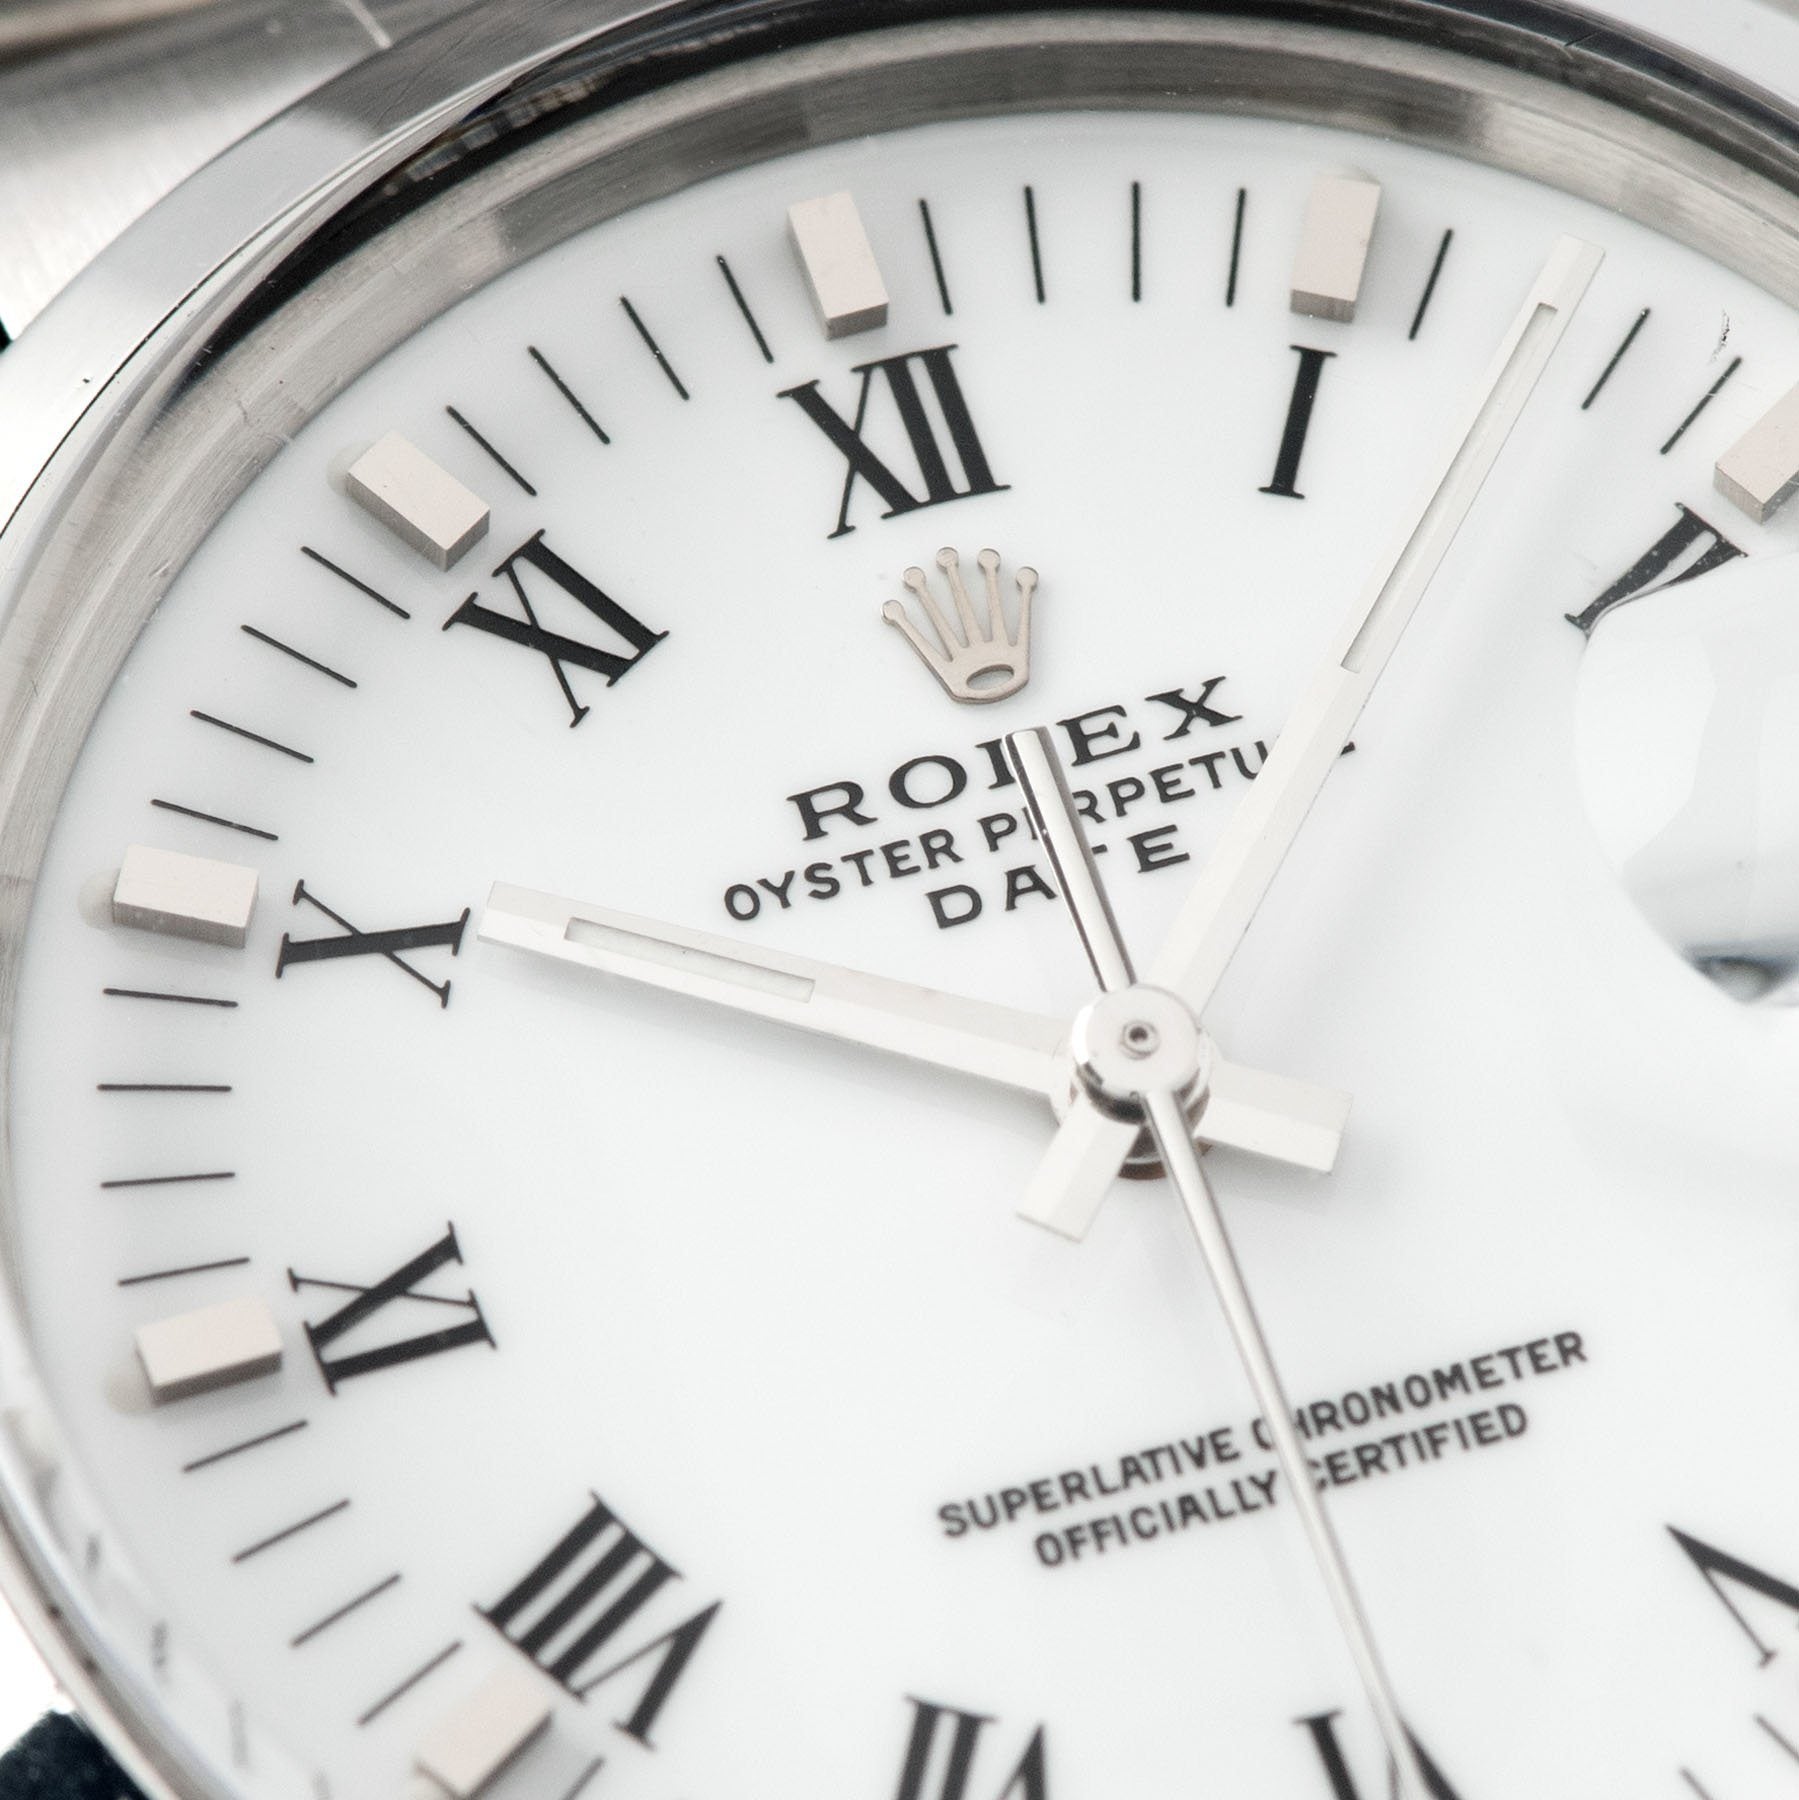 Rolex Oyster Perpetual Date Ref 15000 crown detail